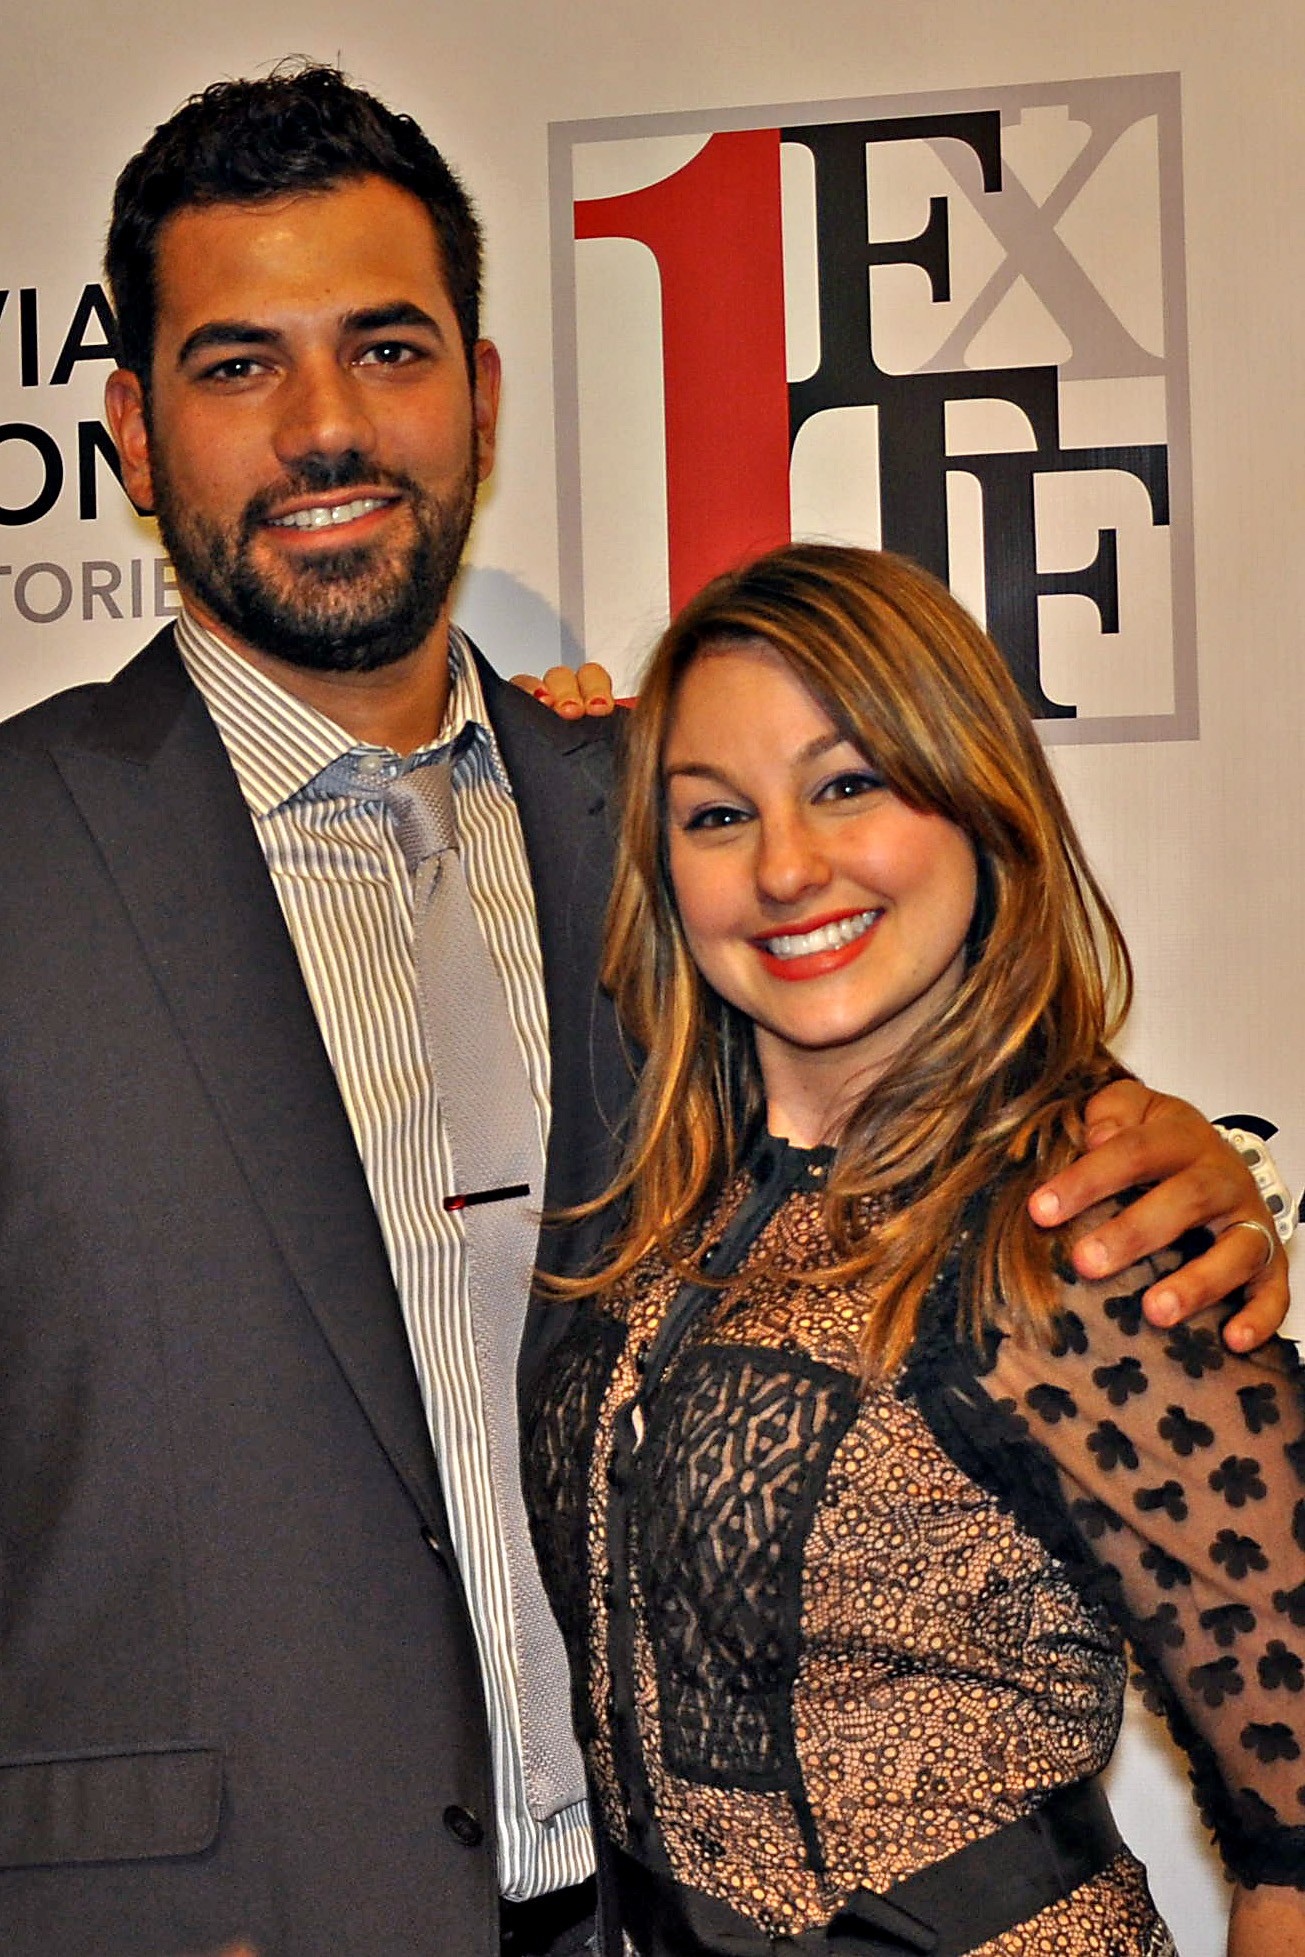 Ali Kafshi and Daniela Schrier Kafshi supporting Fall to Rise at the First Time Fest in NYC